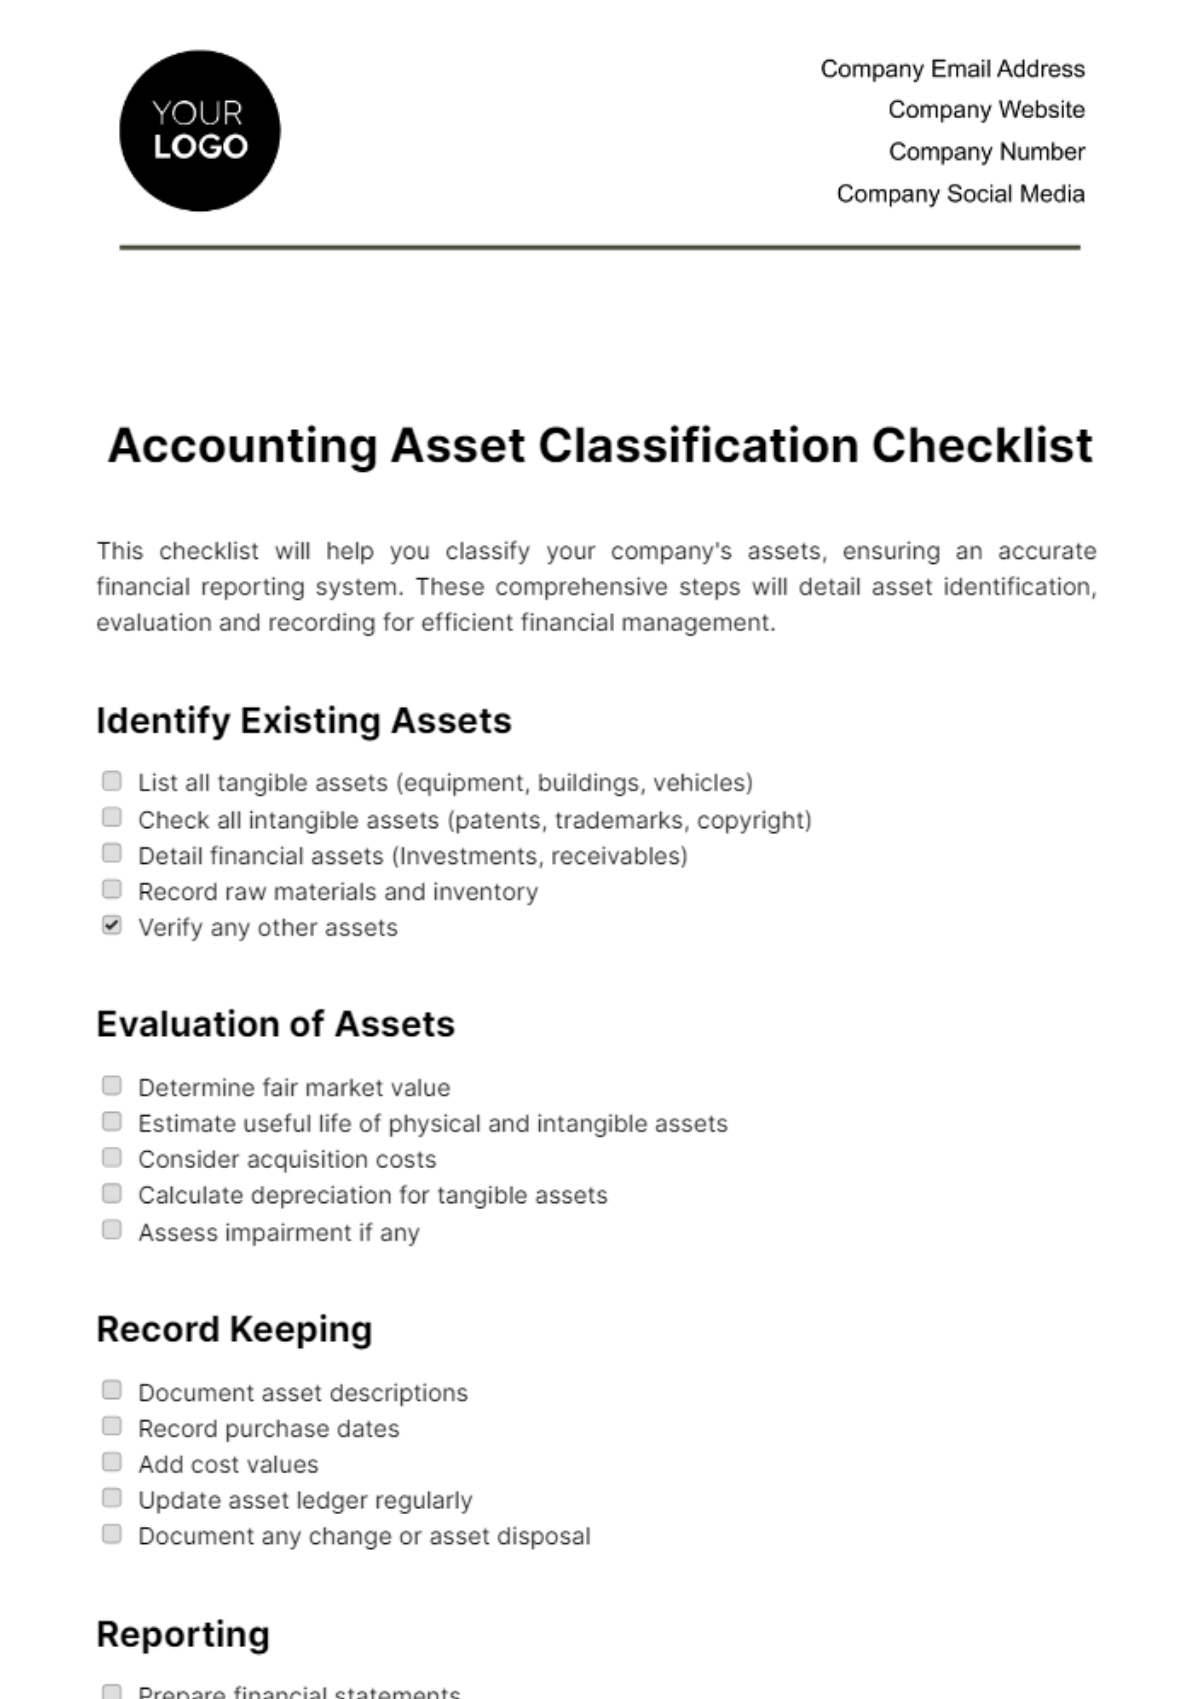 Accounting Asset Classification Checklist Template